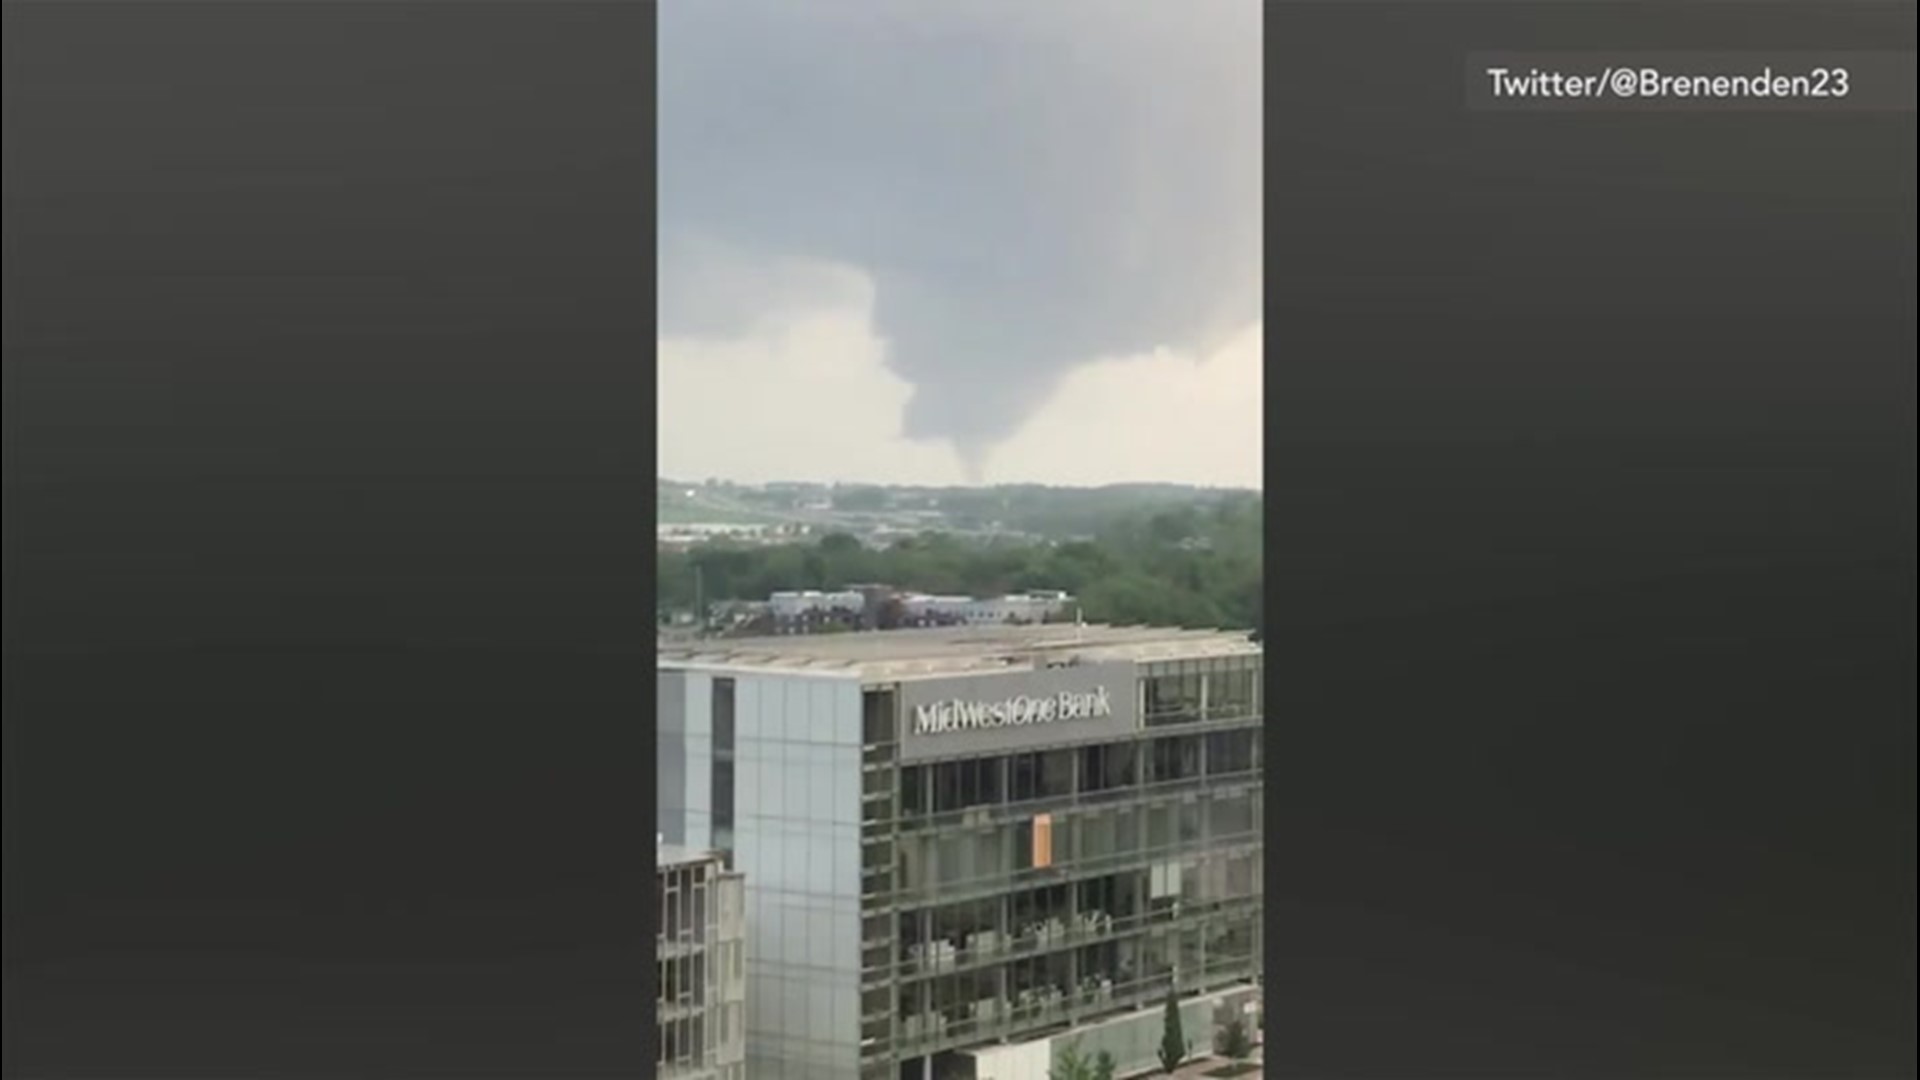 As clouds started to spin north of Iowa City, Iowa on May 23, a group of people were to catch the would-be tornado from their hotel room. Though the clouds never formed into a true hurricane, just the threat of one can put people on edge.